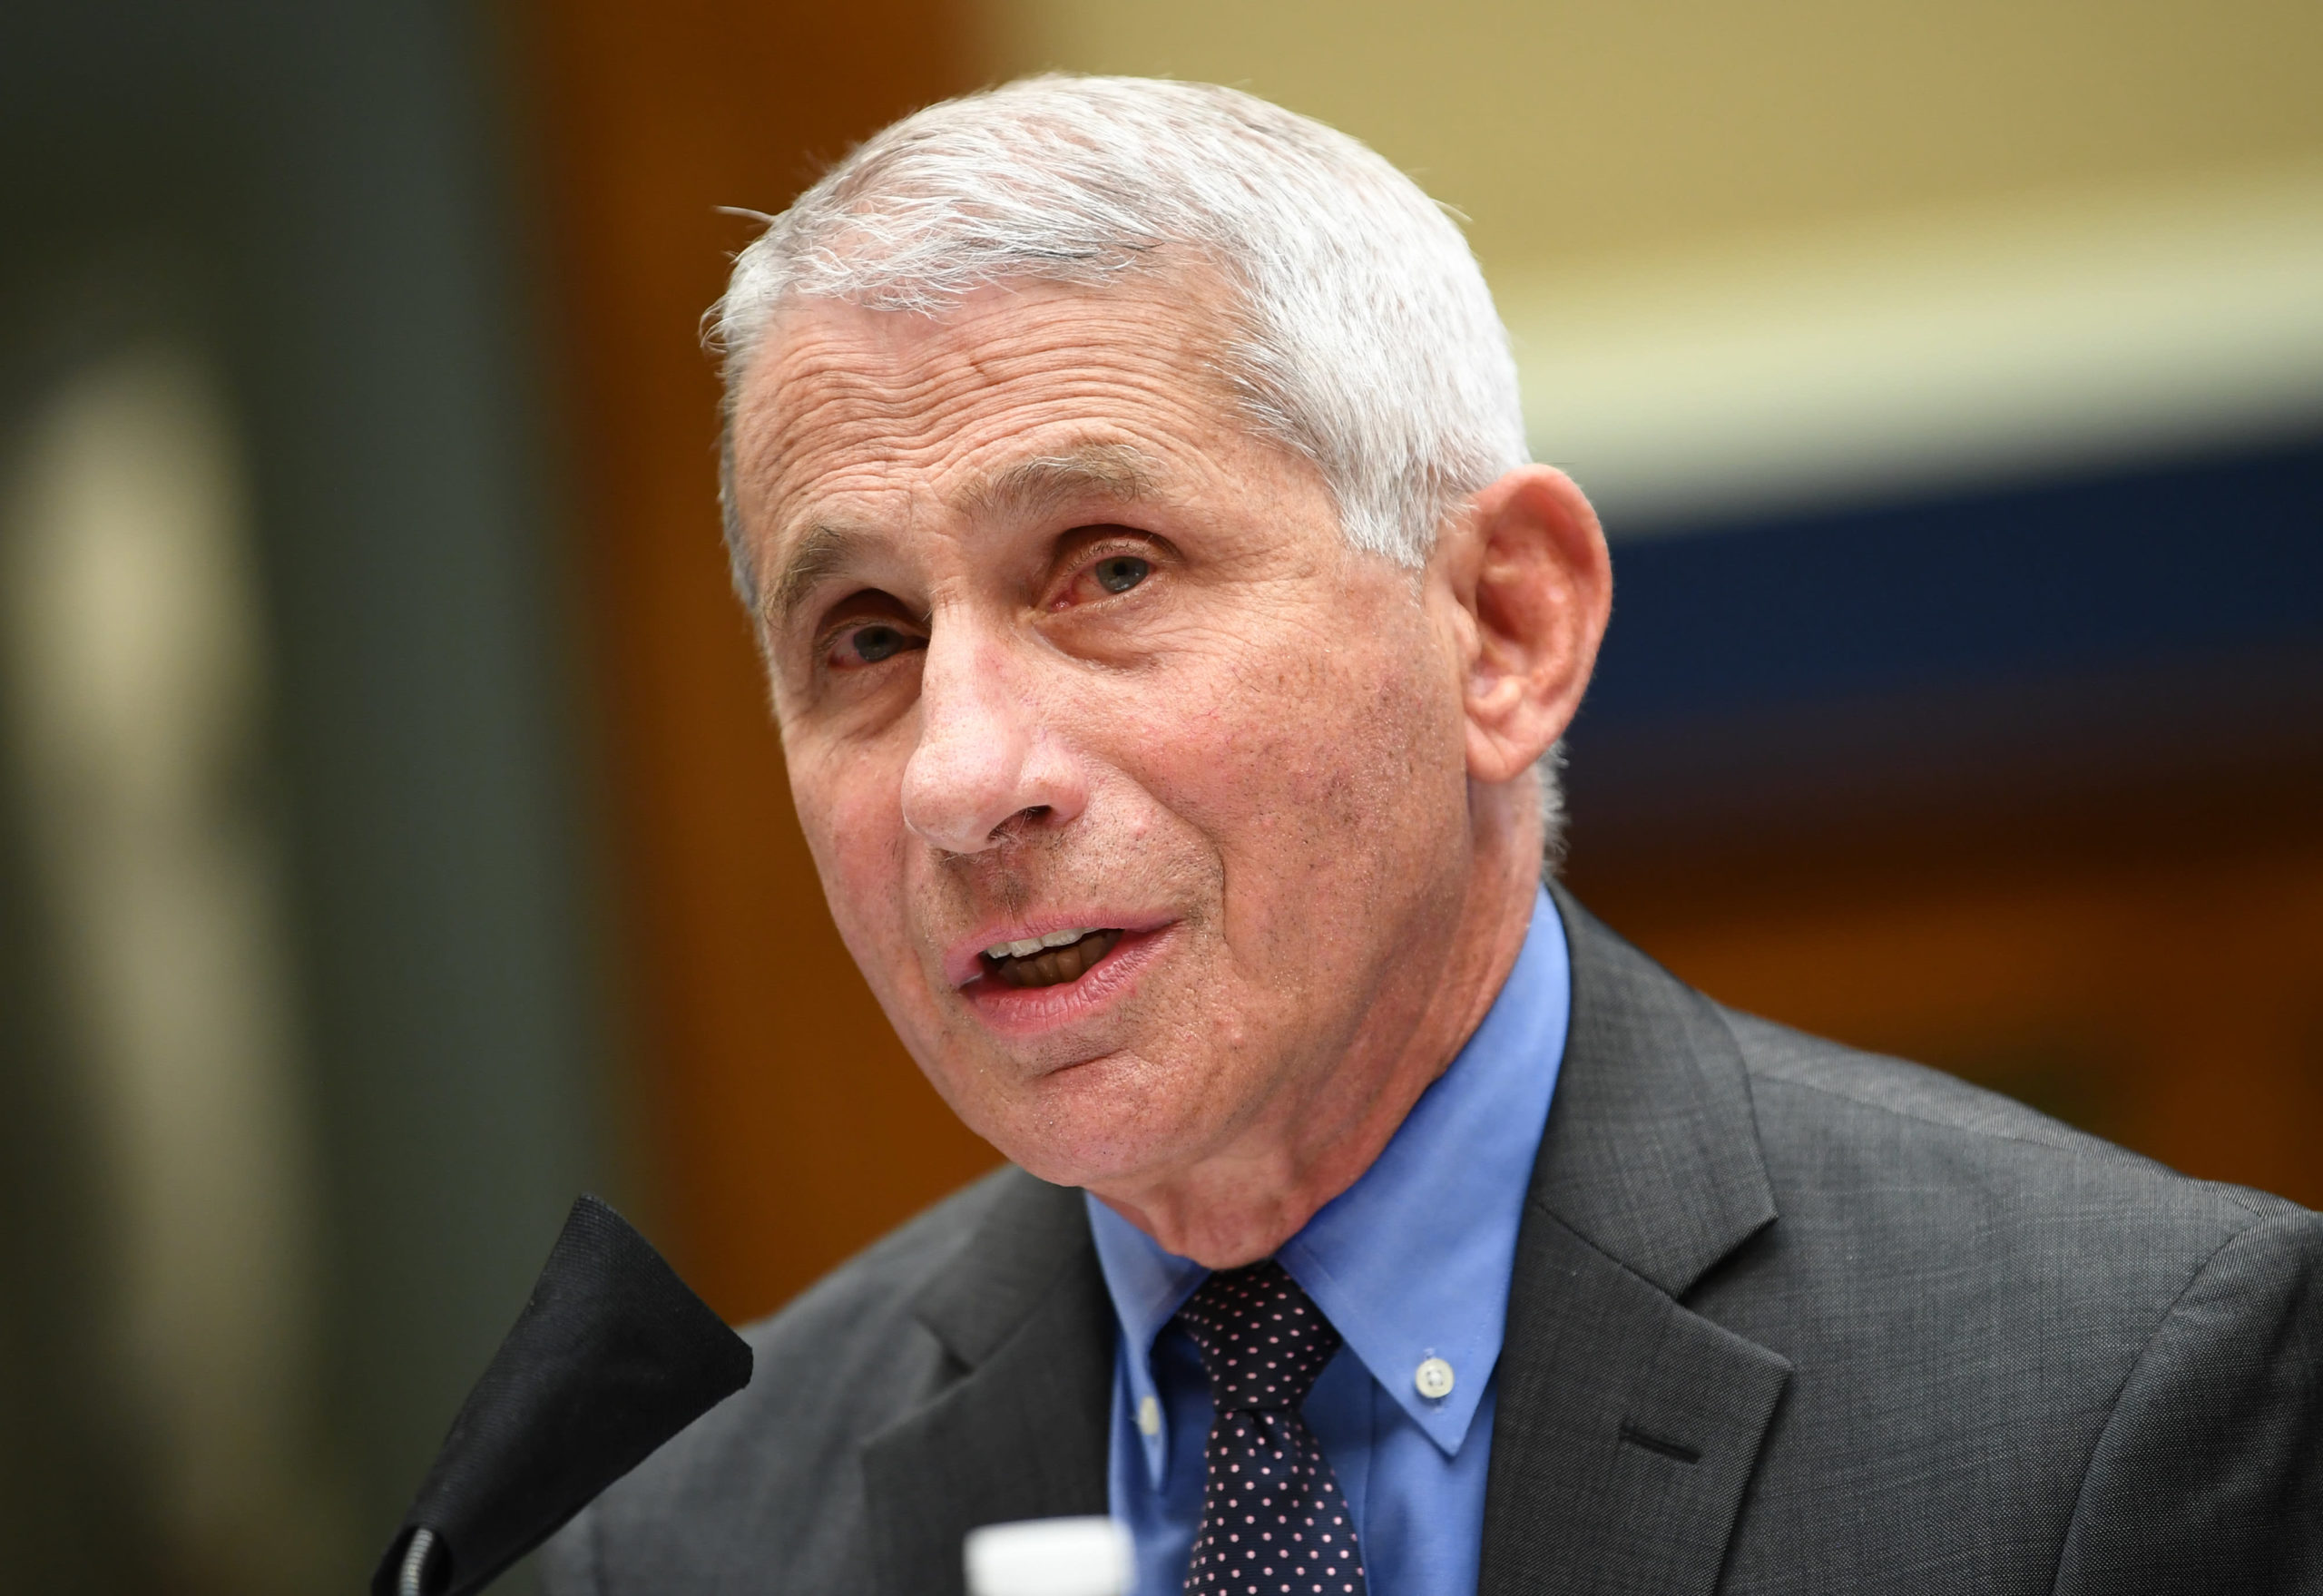 Dr. Anthony Fauci pleads with younger folks: ‘you are propagating the pandemic’